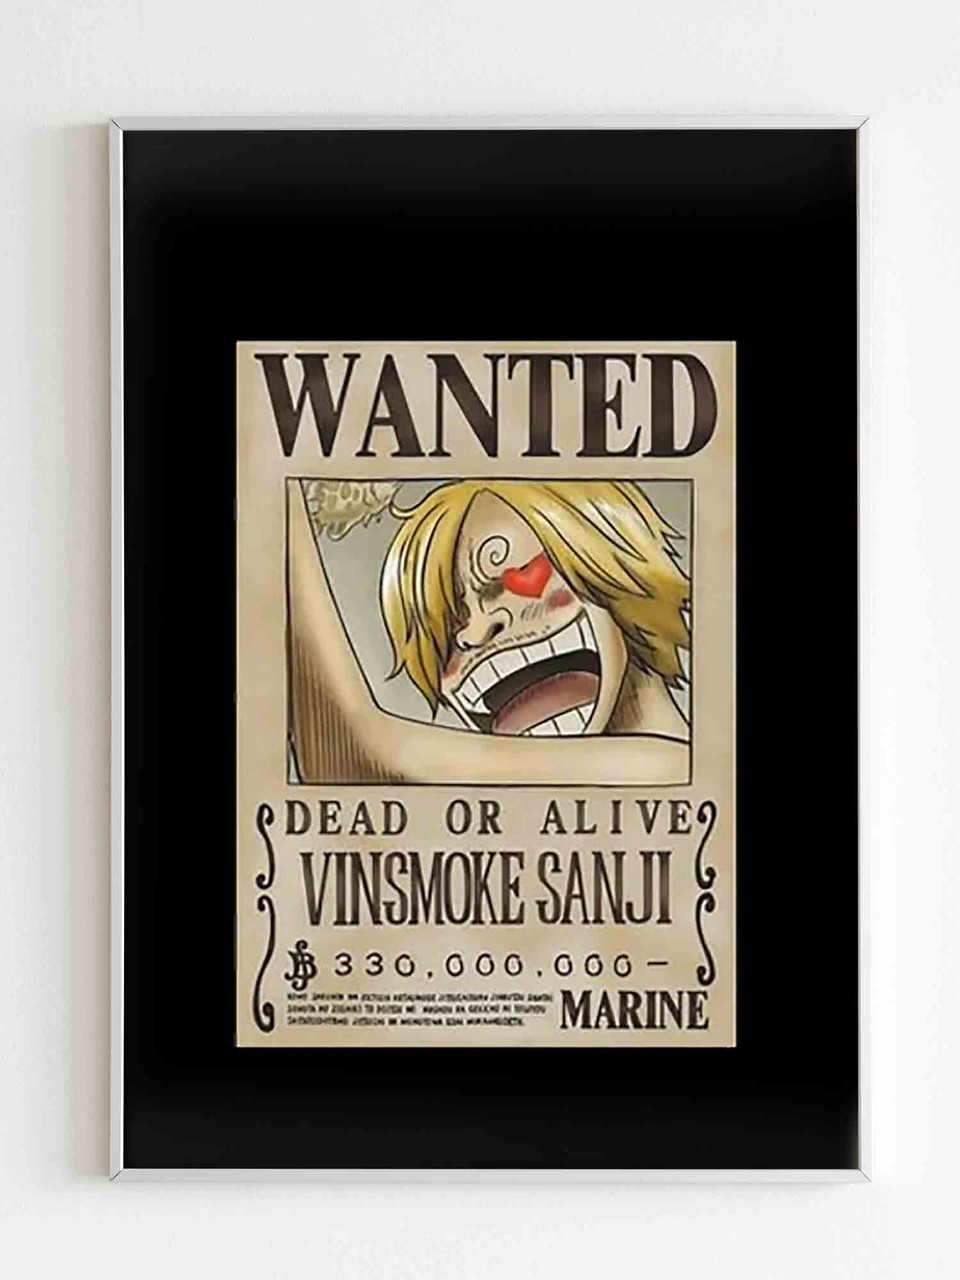 https://cdn11.bigcommerce.com/s-fbh9rcmv2i/images/stencil/1280x1280/products/371794/410368/sanji_wanted_one_piece_vintage__16247.1677047825.jpg?c=1